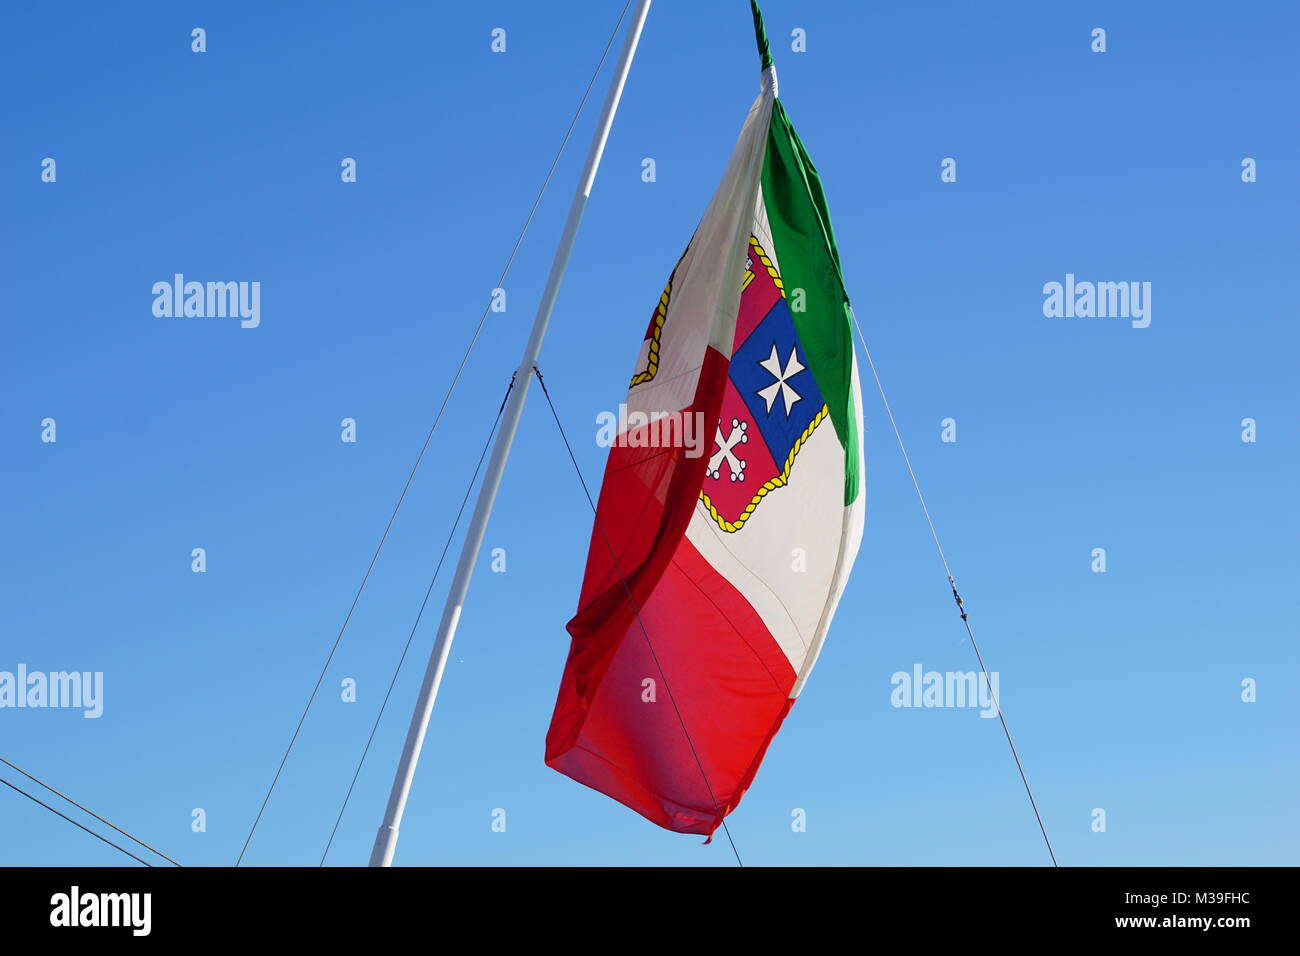 Italy flag with coat of arms on a cruising ship Stock Photo